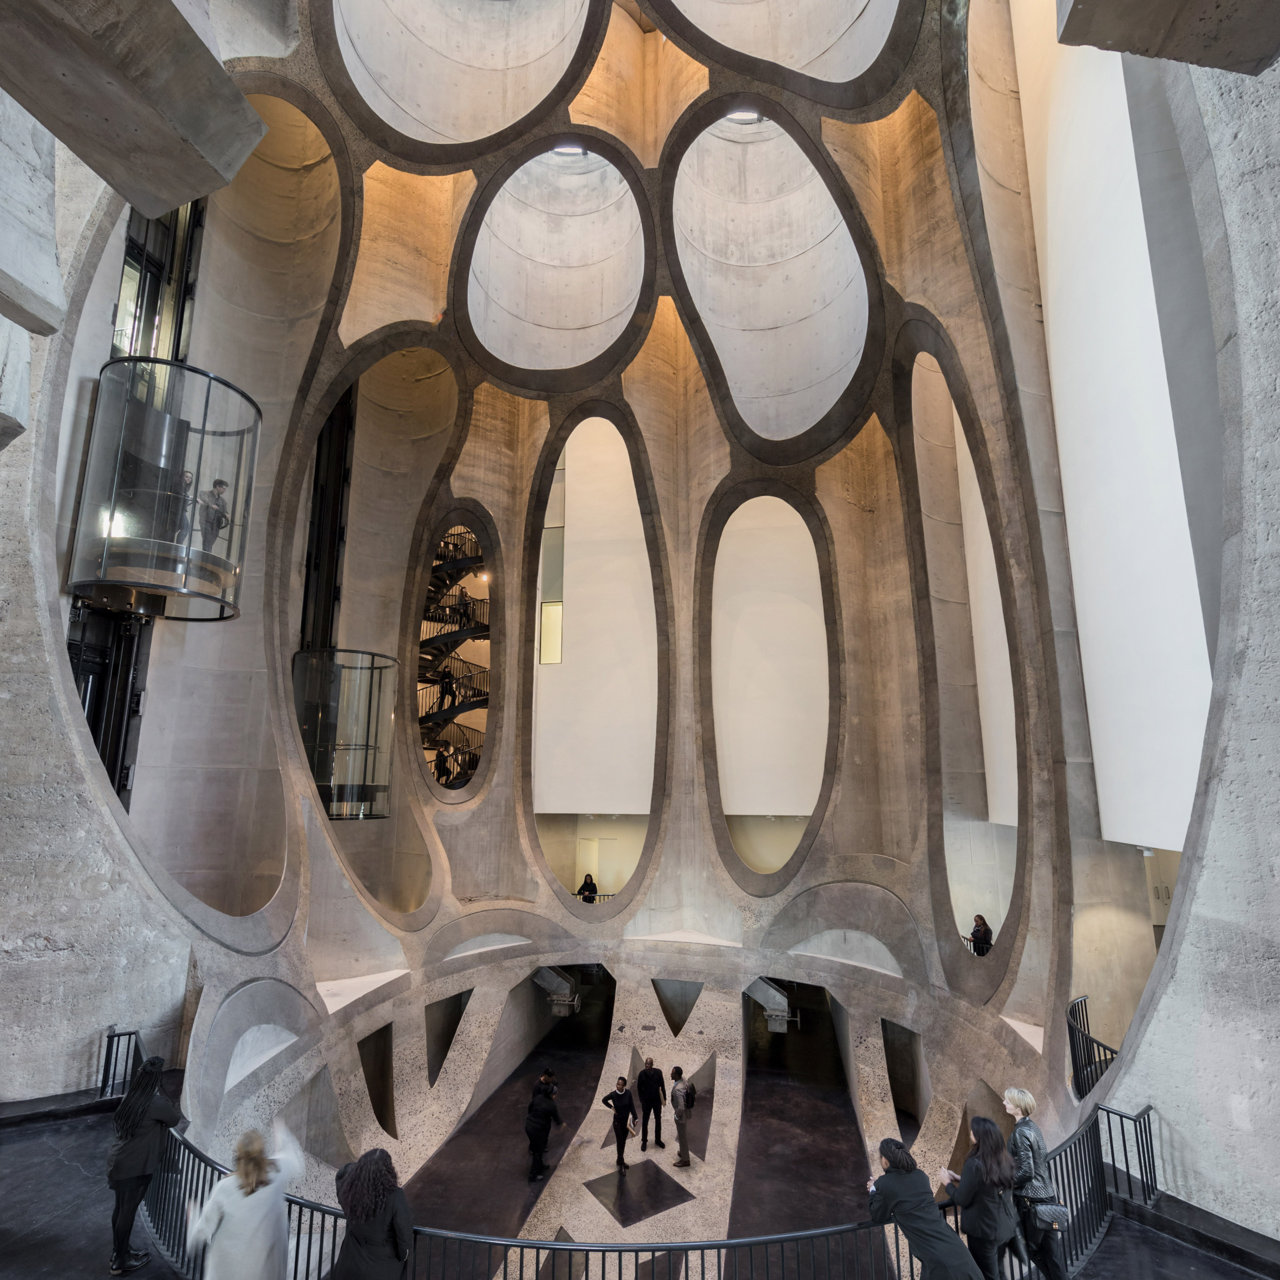 heatherwick-architecture-cultural-galleries-v-and-a-south-africa-interior_dezeen_sq-1.jpg